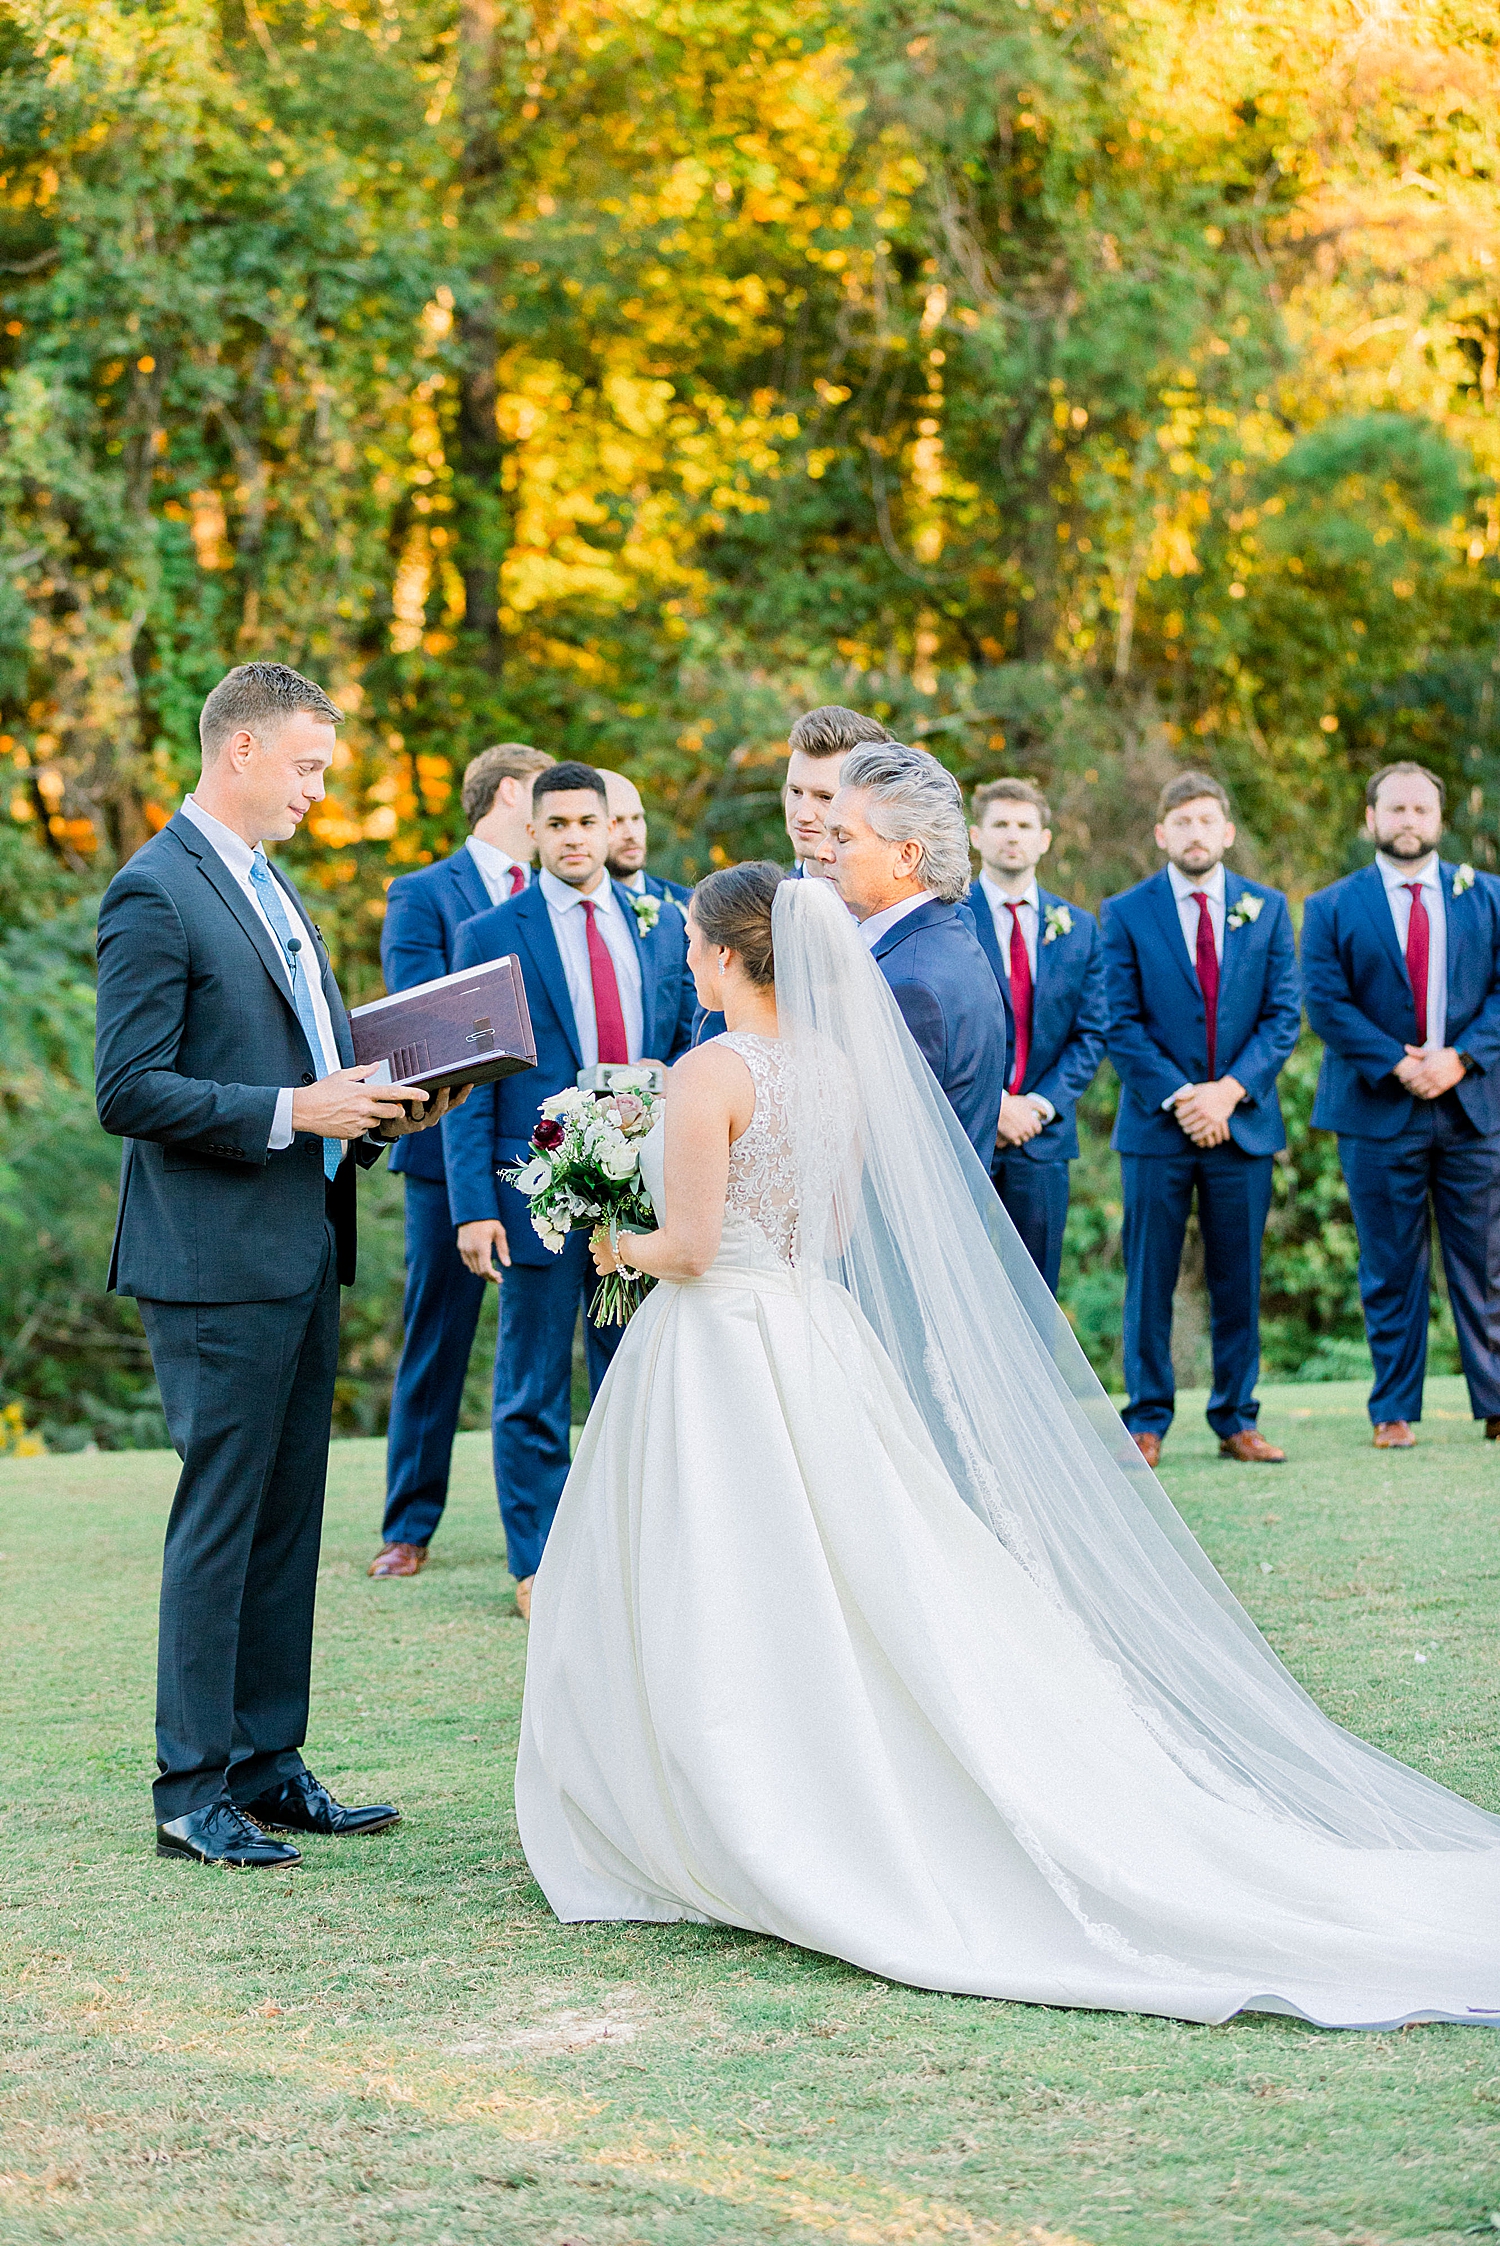 Riverchase Country Club fall wedding ceremony outdoors with floral arbor